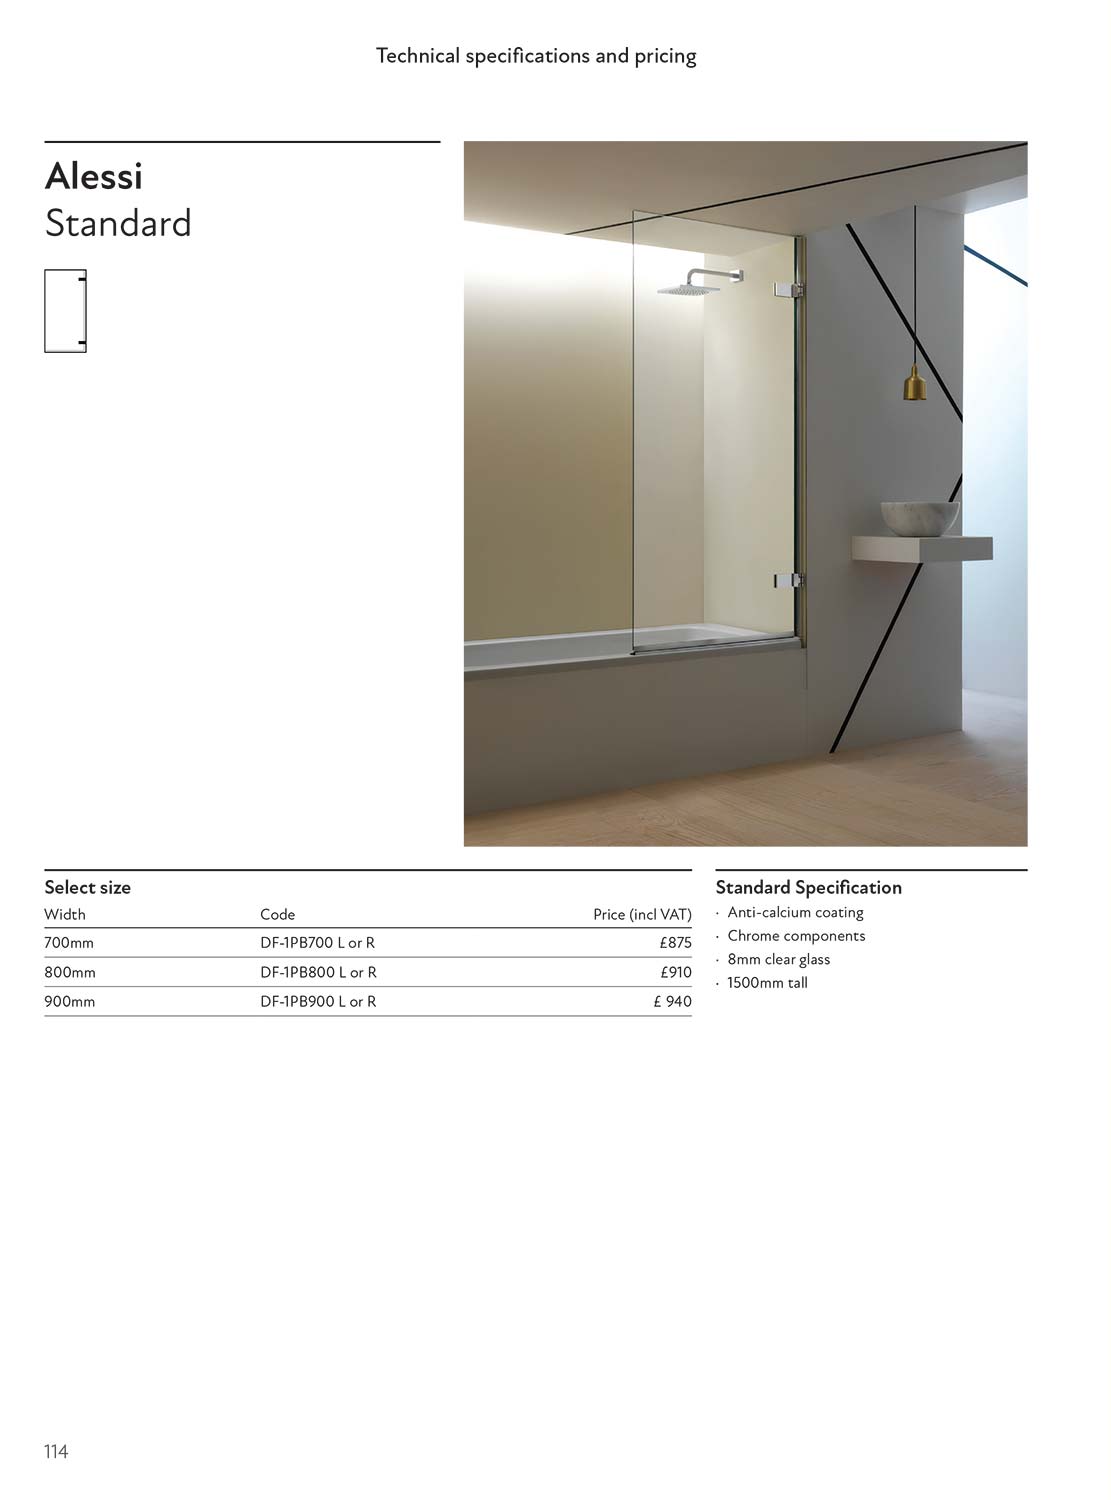 Alessi Standard specification